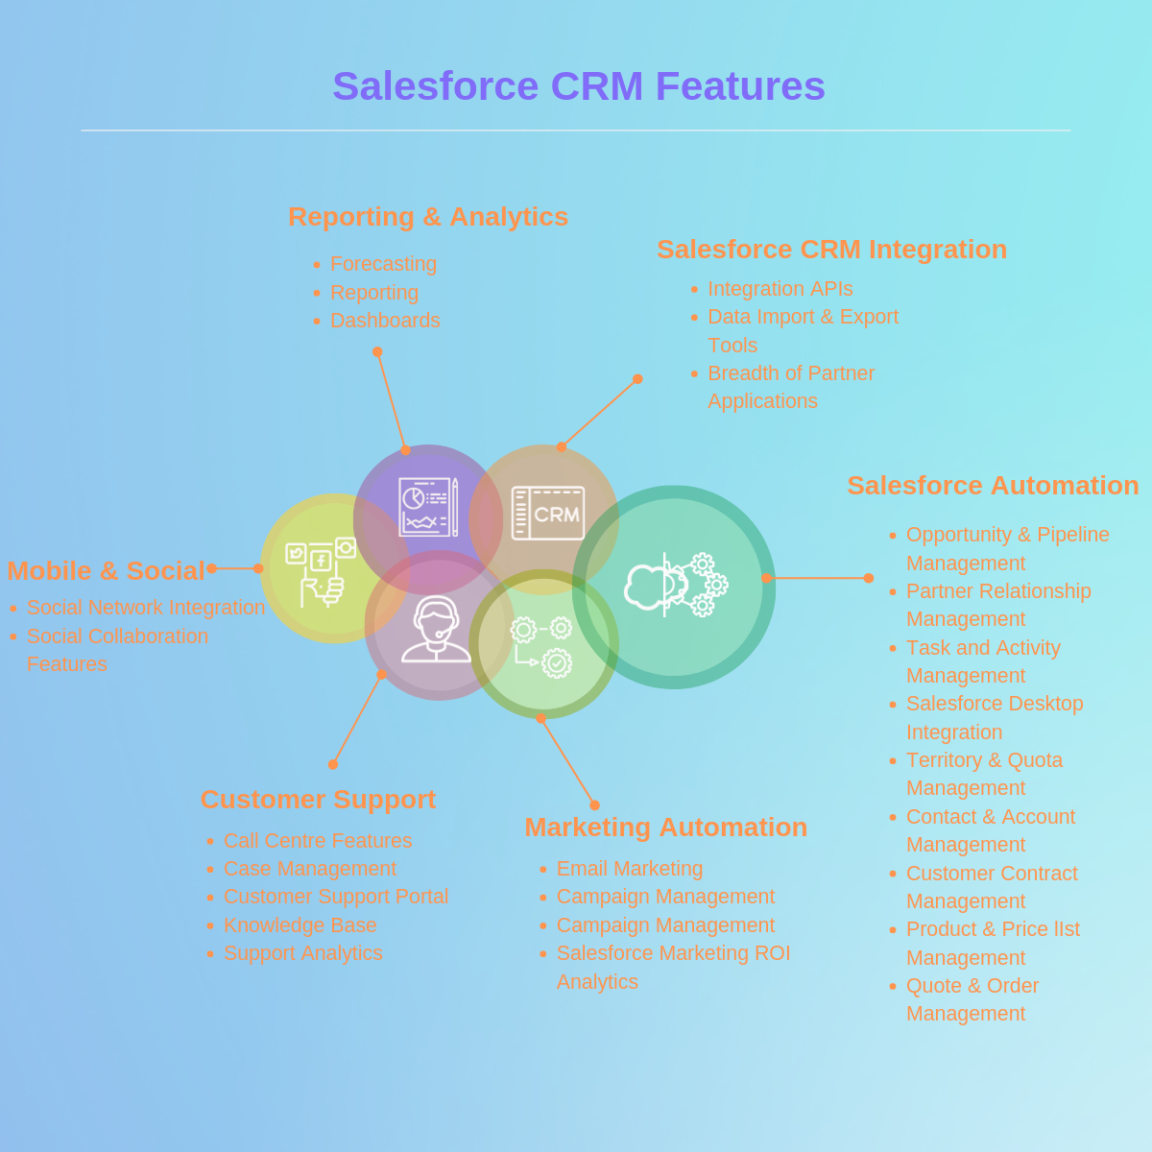 Infographic Salesforce CRM Features Infographic.tv Number one